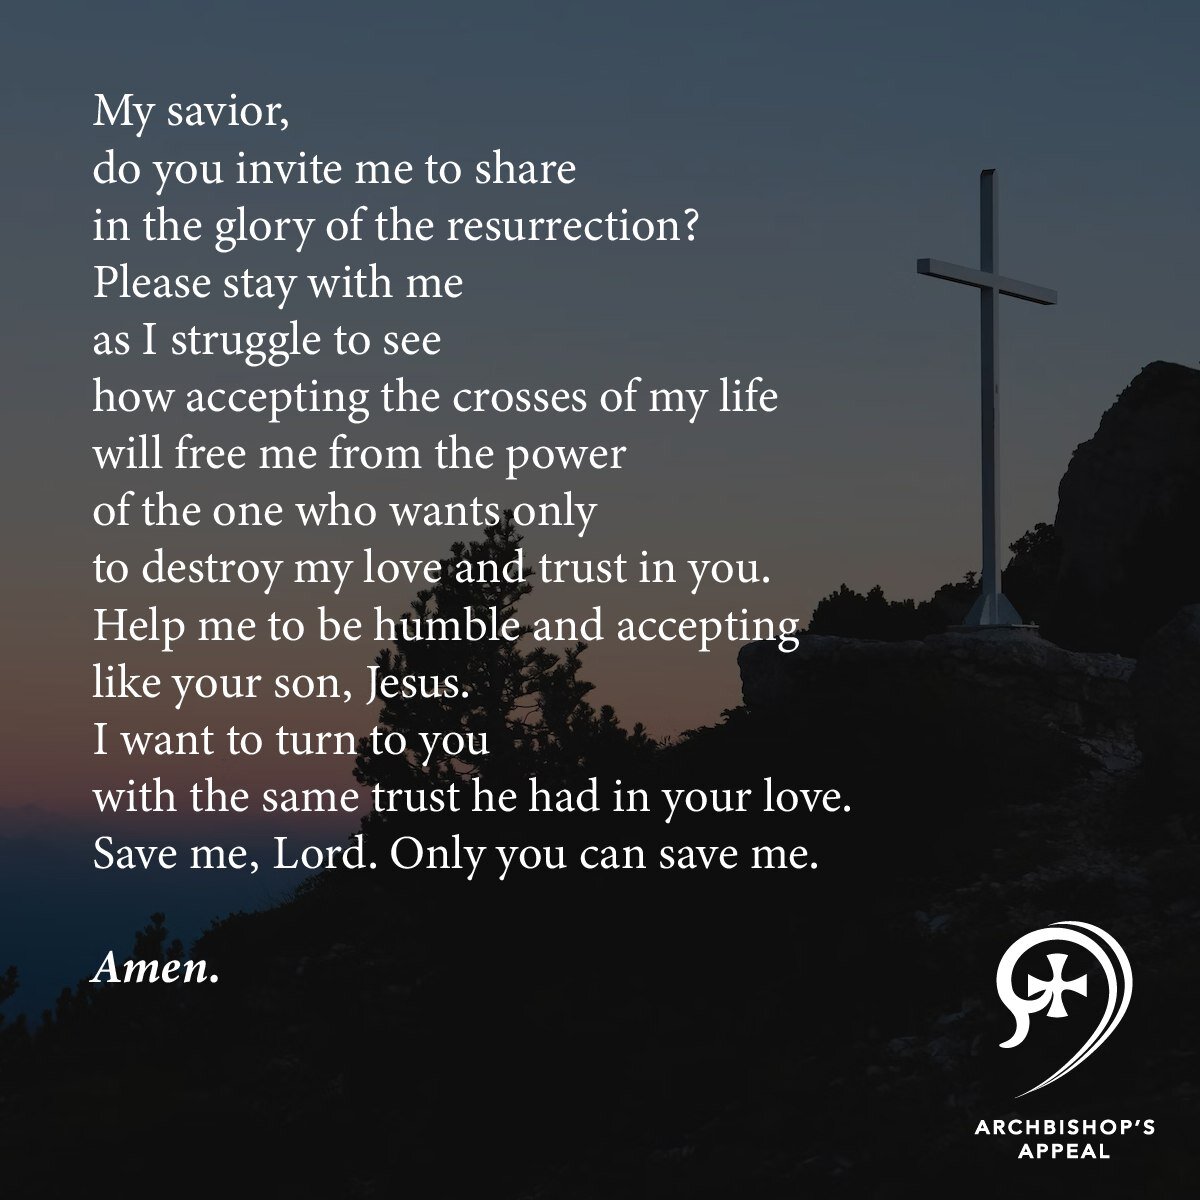 My savior,
do you invite me to share
in the glory of the resurrection?
Please stay with me
as I struggle to see
how accepting the crosses of my life
will free me from the power
of the one who wants only
to destroy my love and trust in you.
Help me to